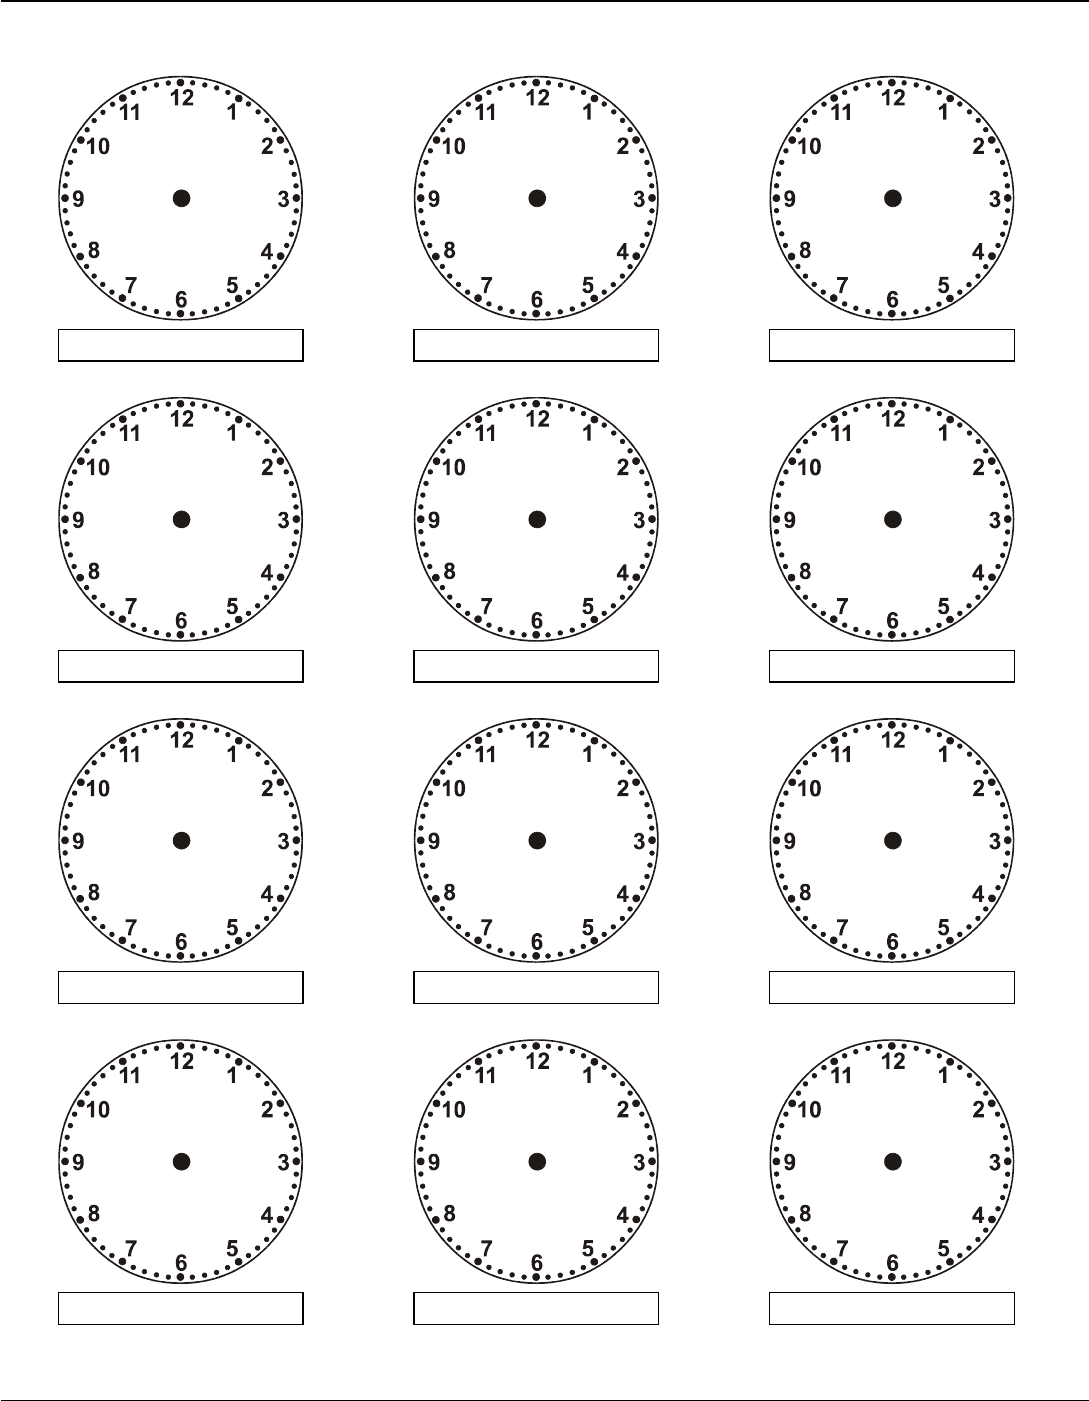 Draw hands on the Clock face to show the time